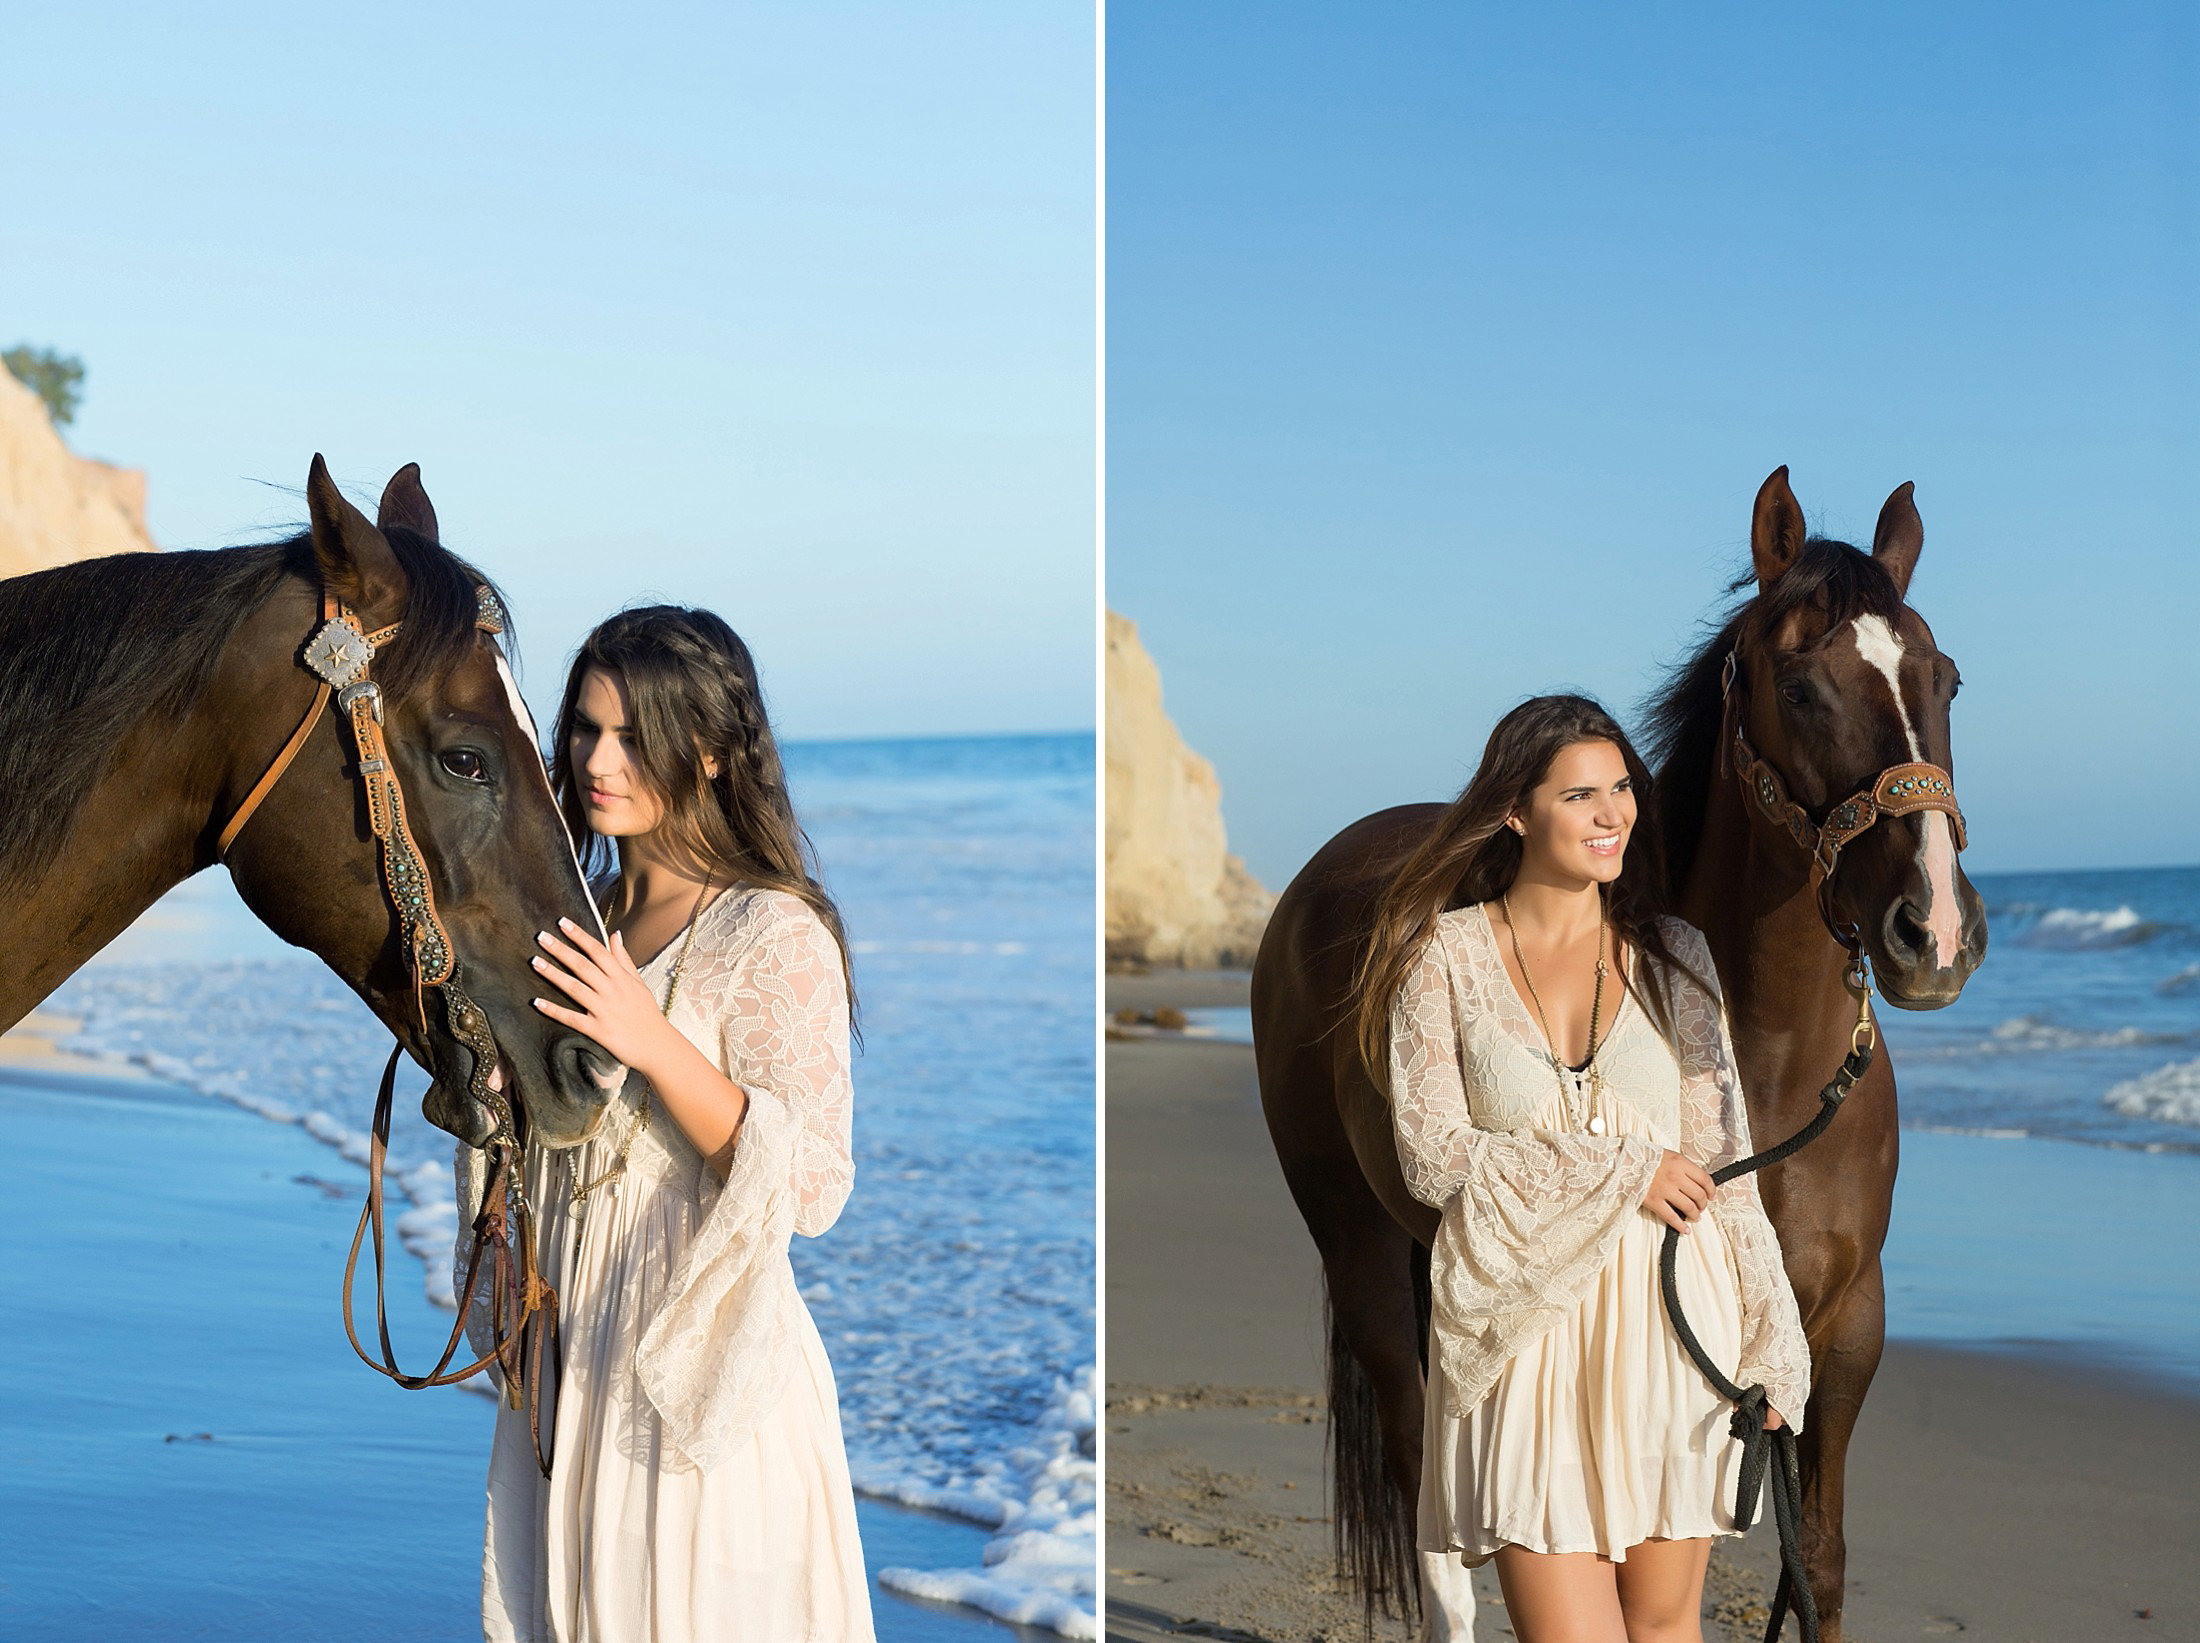 Equestrian Senior Pictures at the Beach by Tara Rochelle